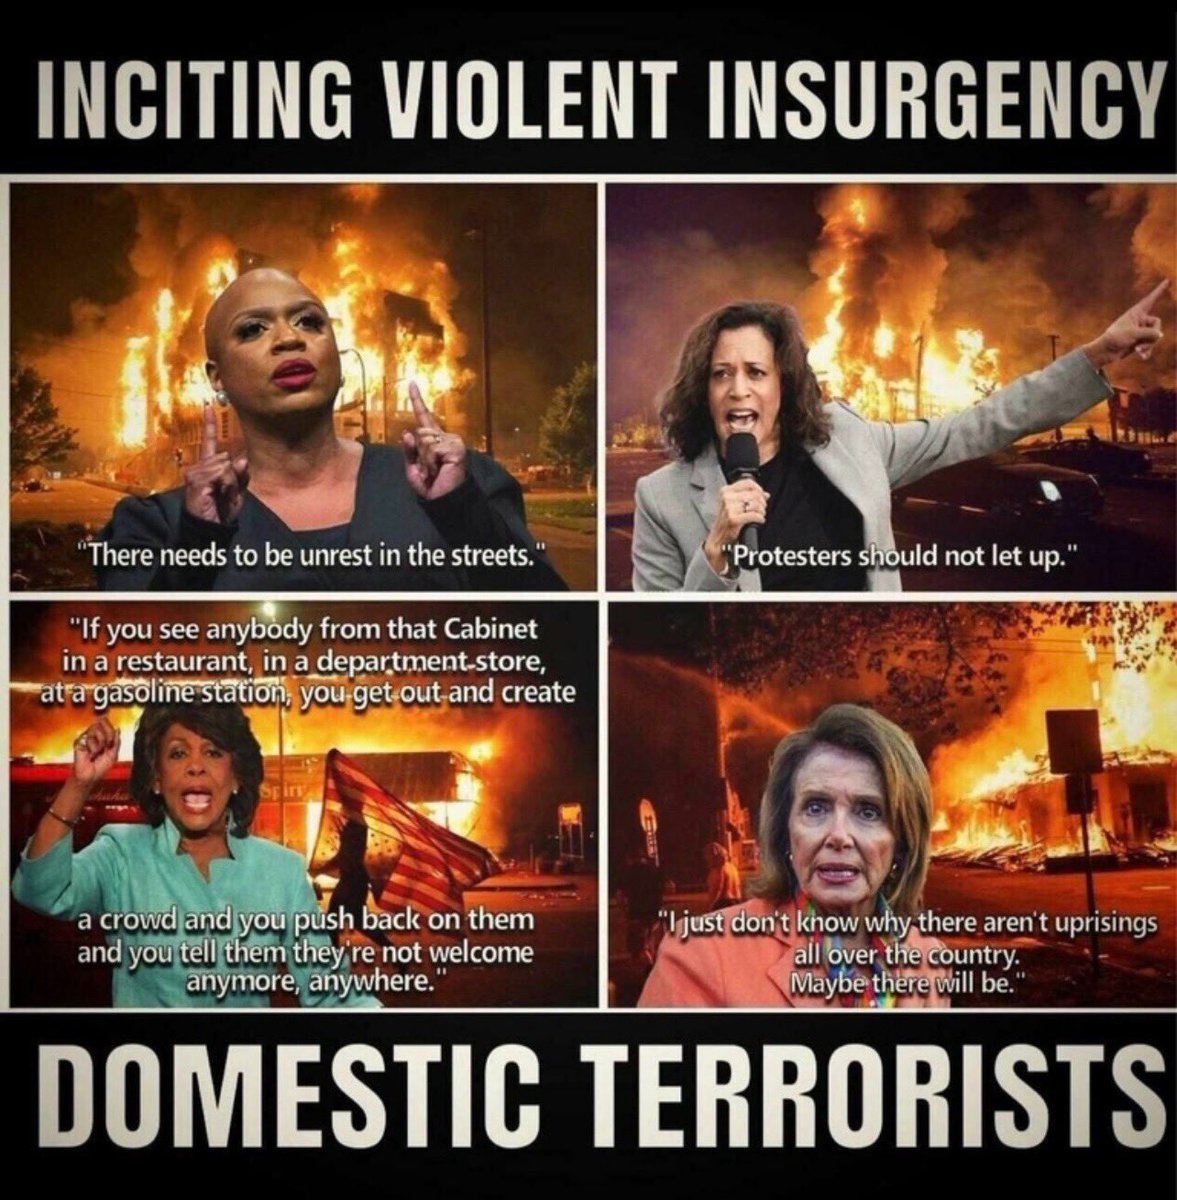 @libsoftiktok @carolmswain With Democrat Party Approval: ANTIFABLM Riots “The Insurance Information Institute has compiled some shocking data. According to the institute, property damage claims from the 2020 summer riots have now likely surpassed $2 billion, making them the costliest riots in US history.”